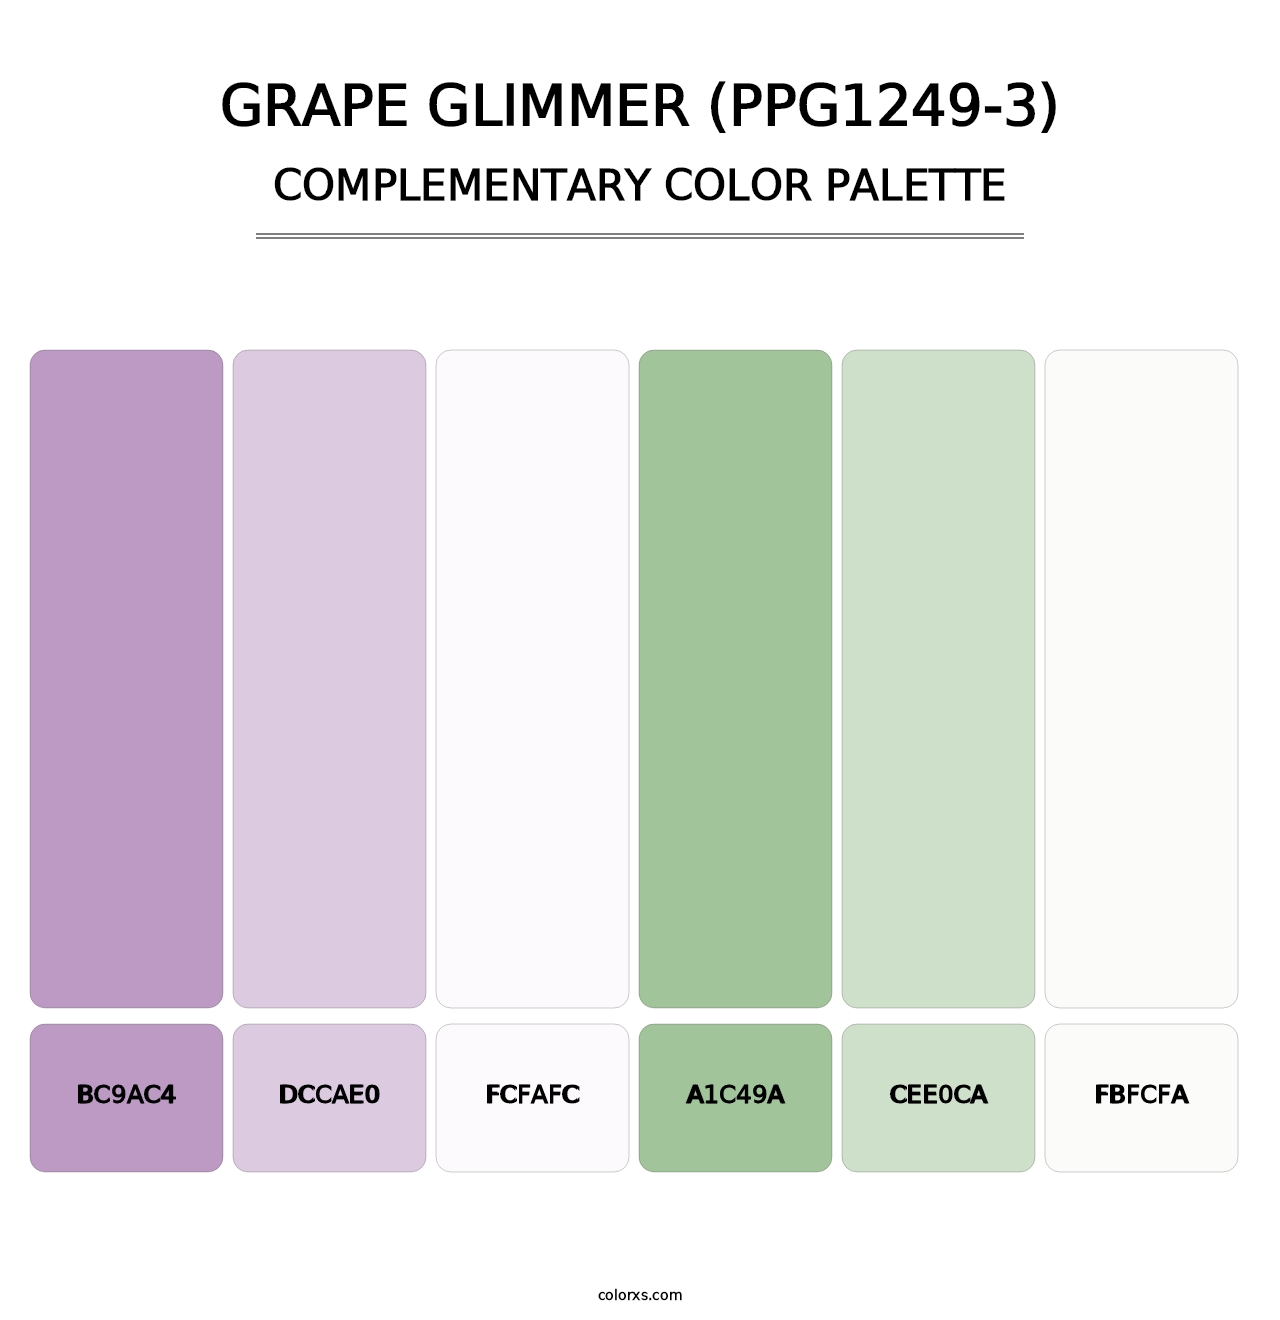 Grape Glimmer (PPG1249-3) - Complementary Color Palette